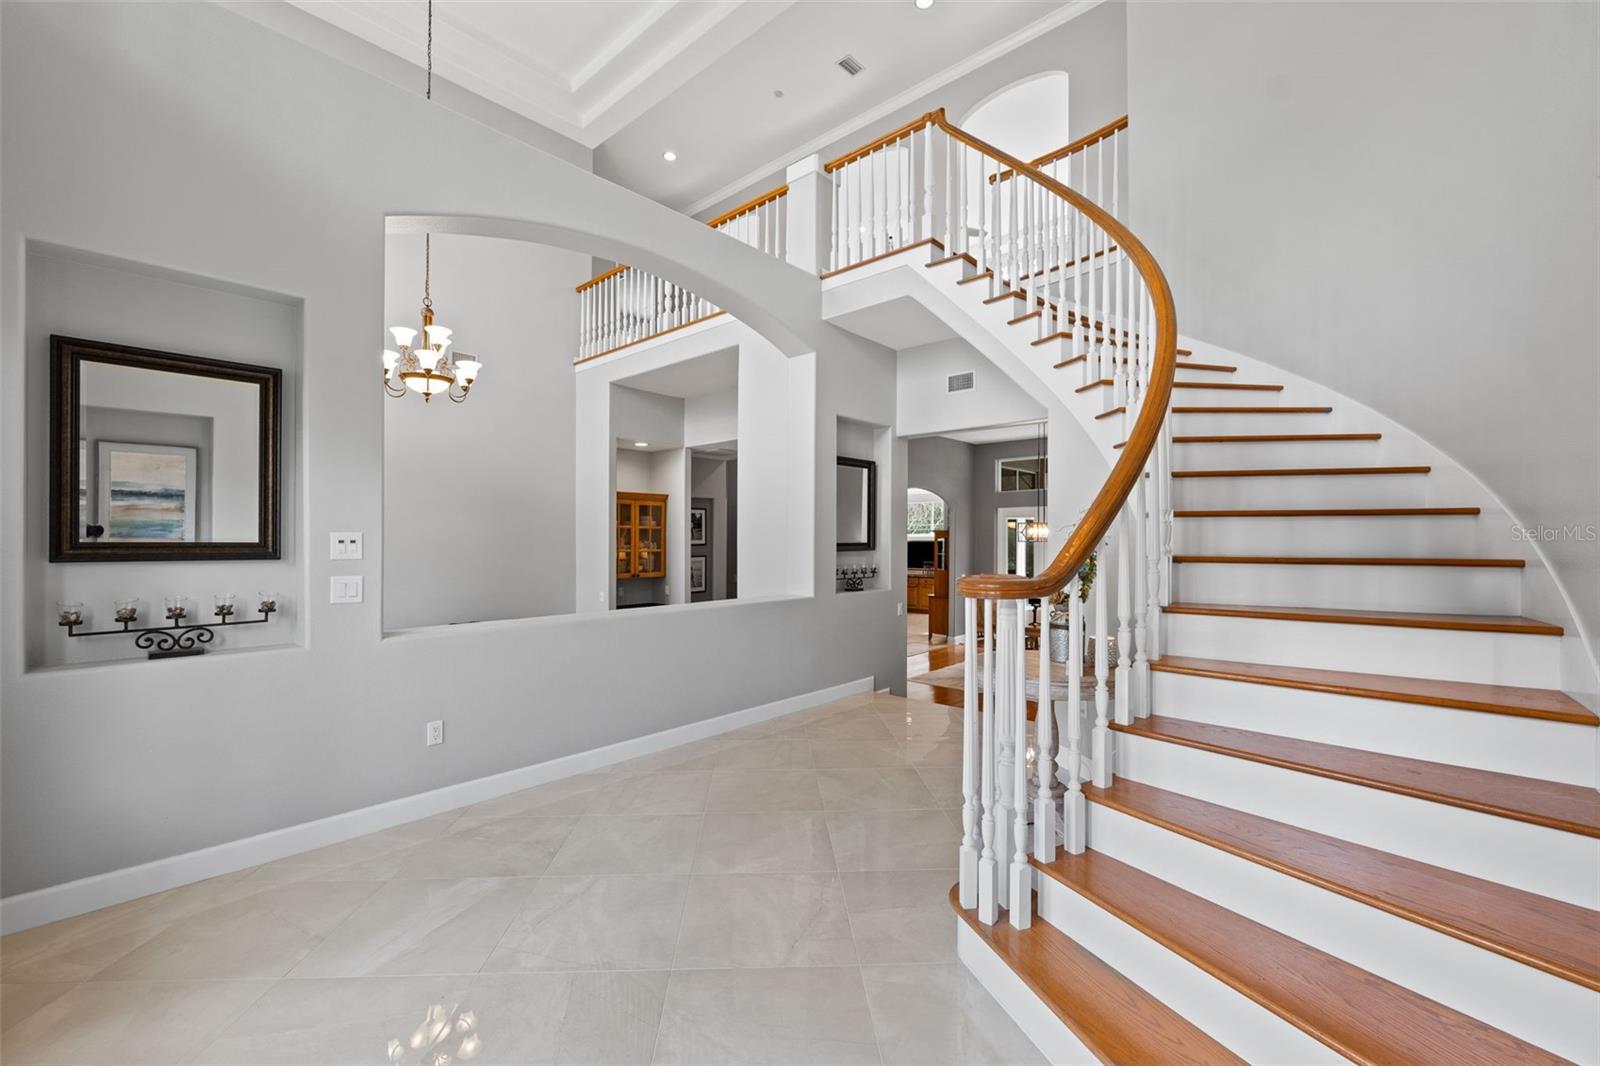 Entryway with stairs